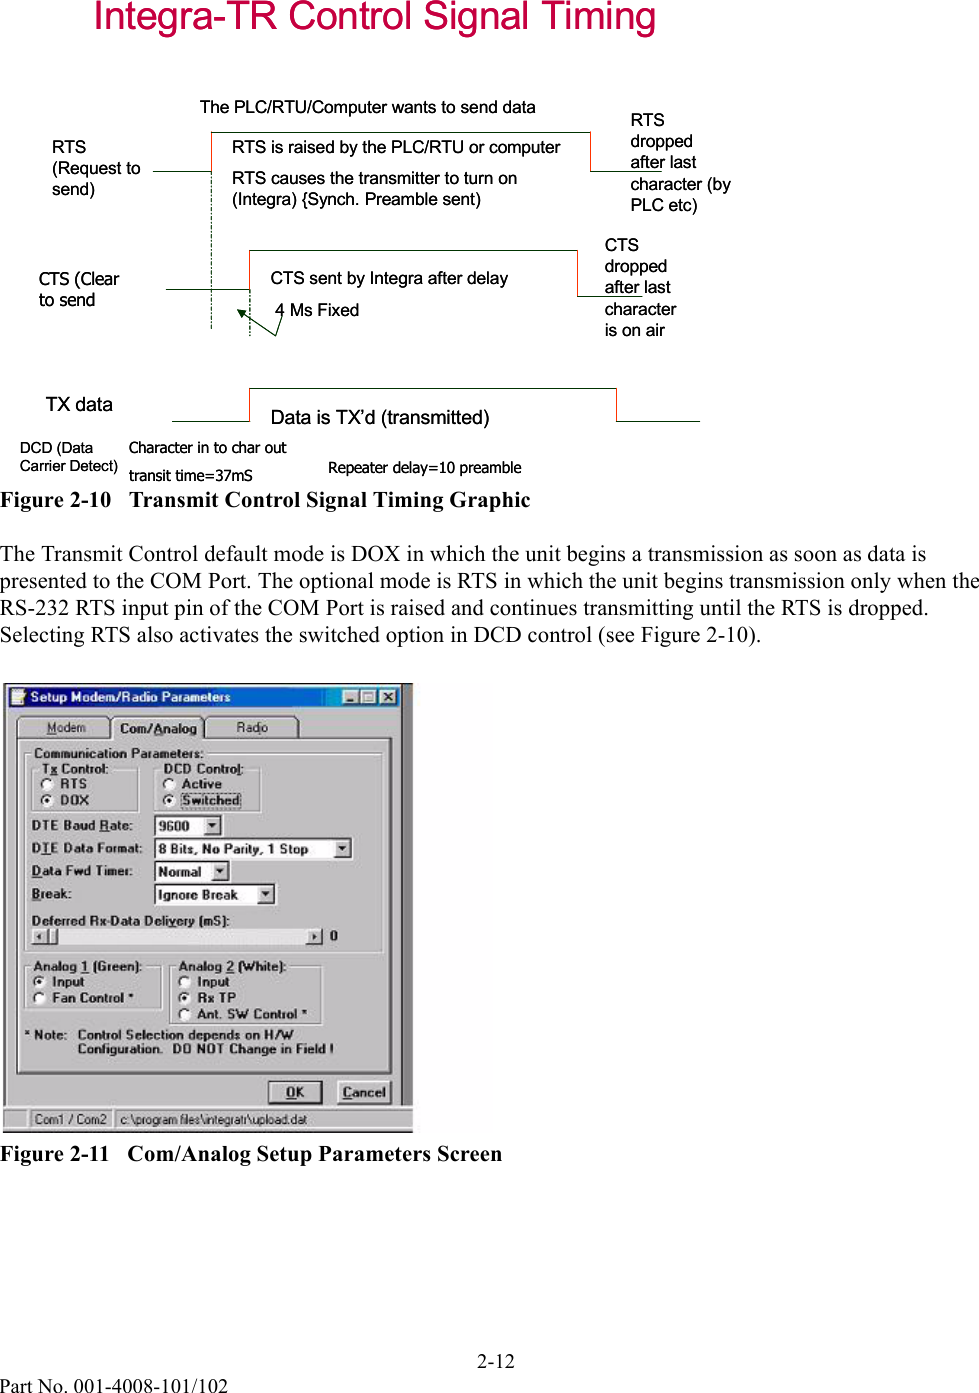 2-12Part No. 001-4008-101/102Figure 2-10   Transmit Control Signal Timing GraphicThe Transmit Control default mode is DOX in which the unit begins a transmission as soon as data is presented to the COM Port. The optional mode is RTS in which the unit begins transmission only when the RS-232 RTS input pin of the COM Port is raised and continues transmitting until the RTS is dropped. Selecting RTS also activates the switched option in DCD control (see Figure 2-10).Figure 2-11   Com/Analog Setup Parameters ScreenIntegra-TR Control Signal TimingRTS (Request to send)CTS (Clear to sendRTS is raised by the PLC/RTU or computerRTS causes the transmitter to turn on (Integra) {Synch. Preamble sent)The PLC/RTU/Computer wants to send dataCTS sent by Integra after delay4 Ms FixedDCD (Data Carrier Detect)TX data Data is TX’d (transmitted)RTS dropped after last character (by PLC etc)CTS dropped after last character is on airCharacter in to char out transit time=37mS Repeater delay=10 preambleIntegra-TR Control Signal TimingRTS (Request to send)CTS (Clear to sendRTS is raised by the PLC/RTU or computerRTS causes the transmitter to turn on (Integra) {Synch. Preamble sent)The PLC/RTU/Computer wants to send dataCTS sent by Integra after delay4 Ms FixedDCD (Data Carrier Detect)TX data Data is TX’d (transmitted)RTS dropped after last character (by PLC etc)CTS dropped after last character is on airCharacter in to char out transit time=37mS Repeater delay=10 preamble